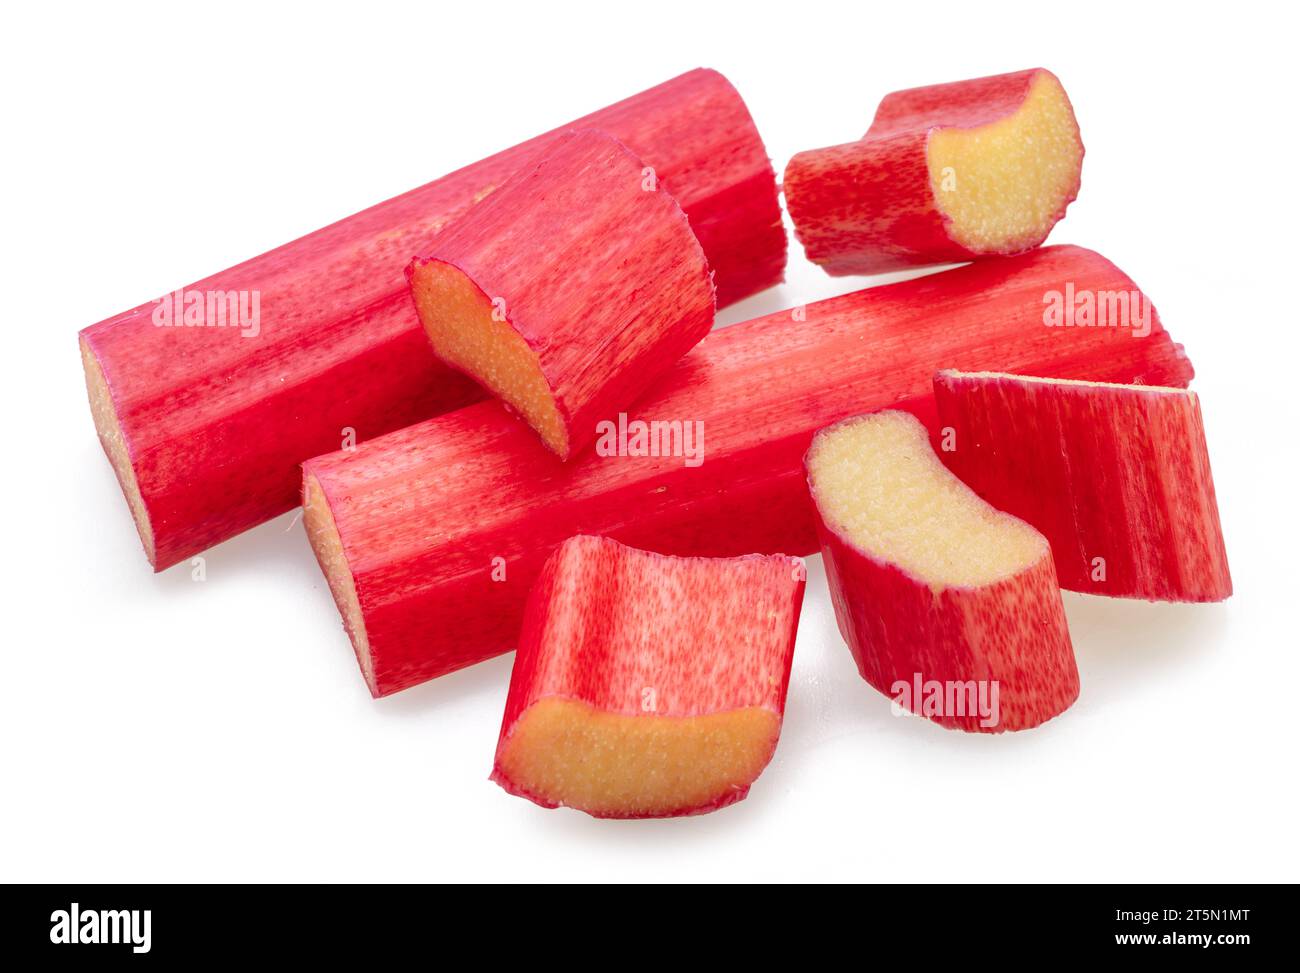 Rhubarb stems' cuts isolated on white background. Stock Photo